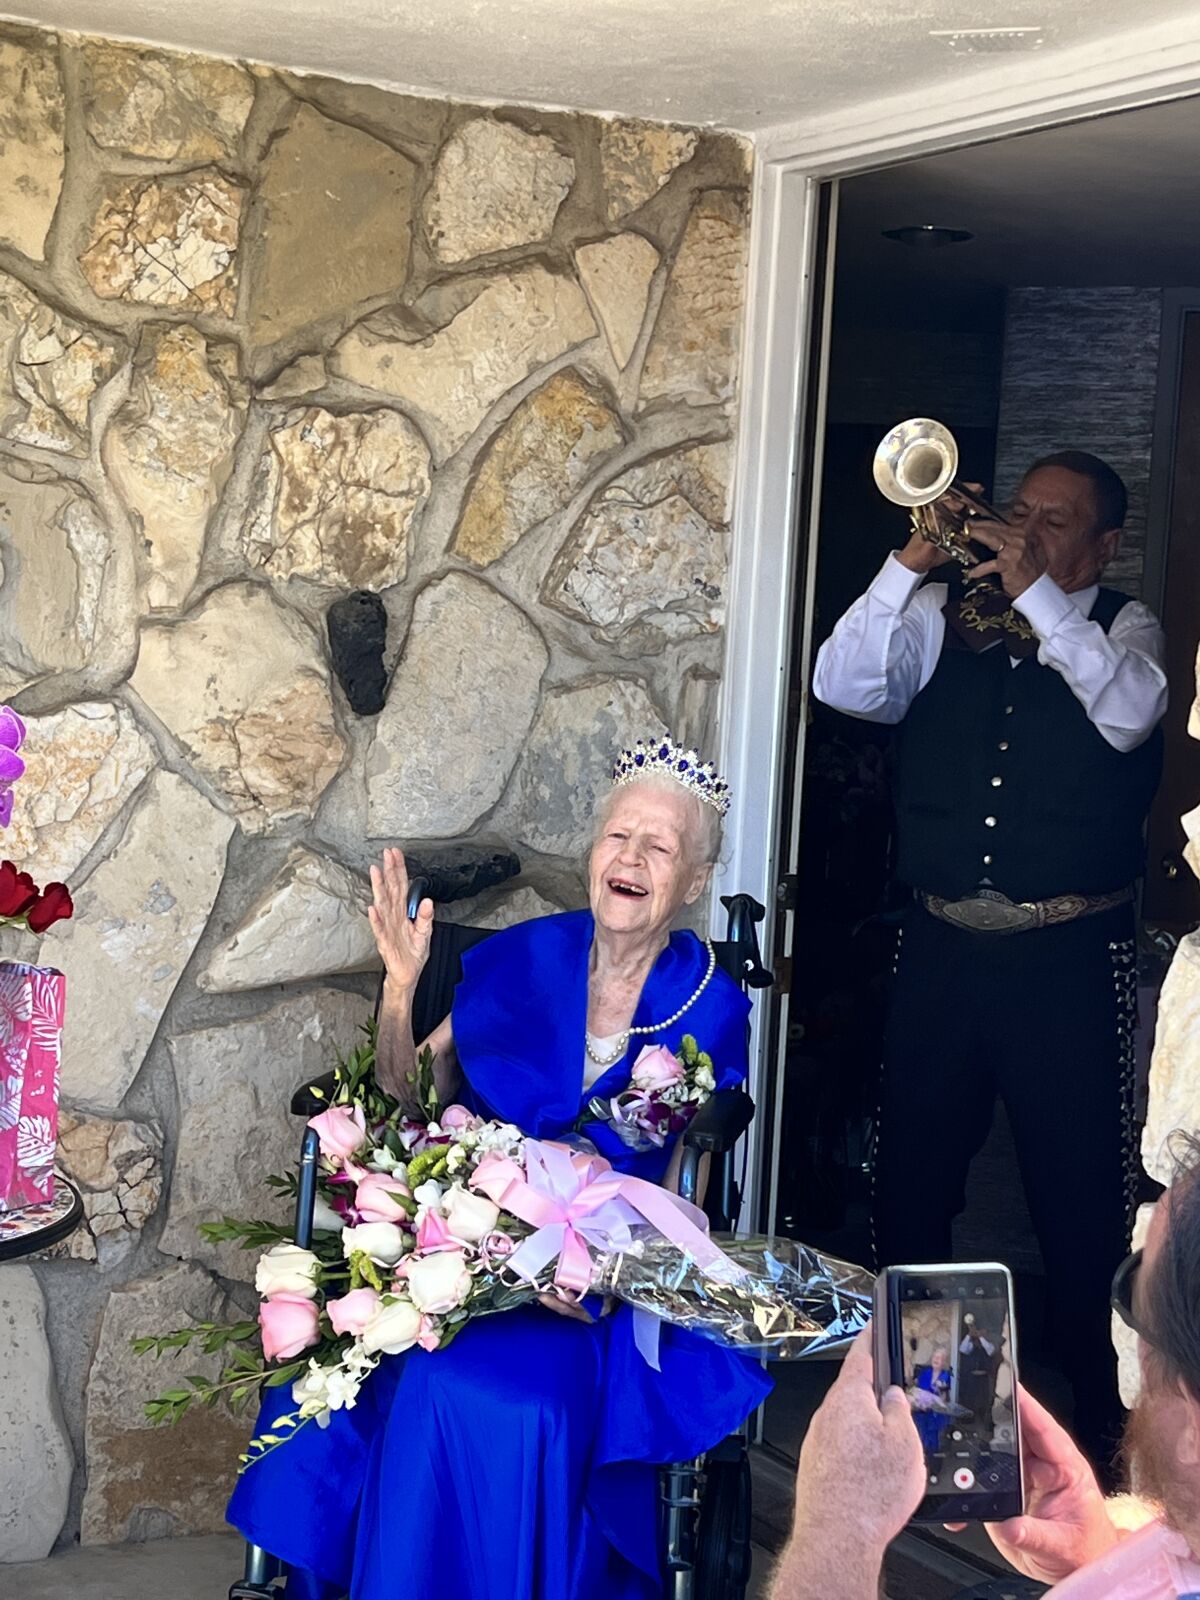 Violet Patton is surprised by a mariachi player at her 106th birthday party Aug. 30.